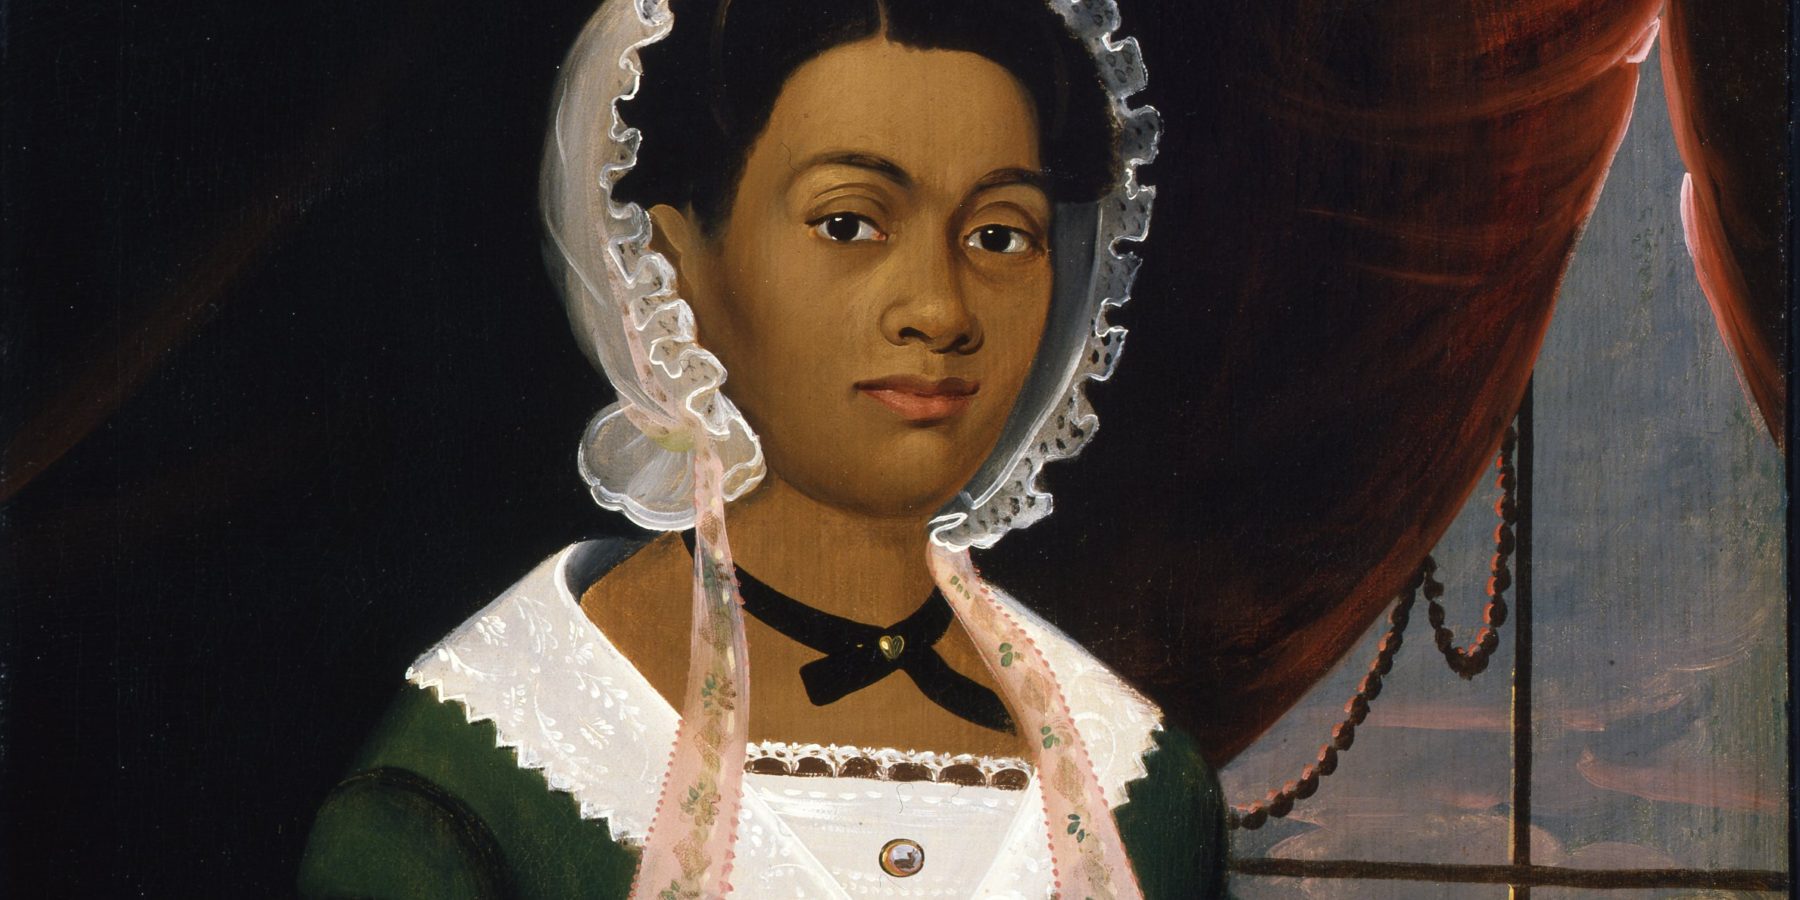 A Look at the Lawsons: 19th Century African American Portraits